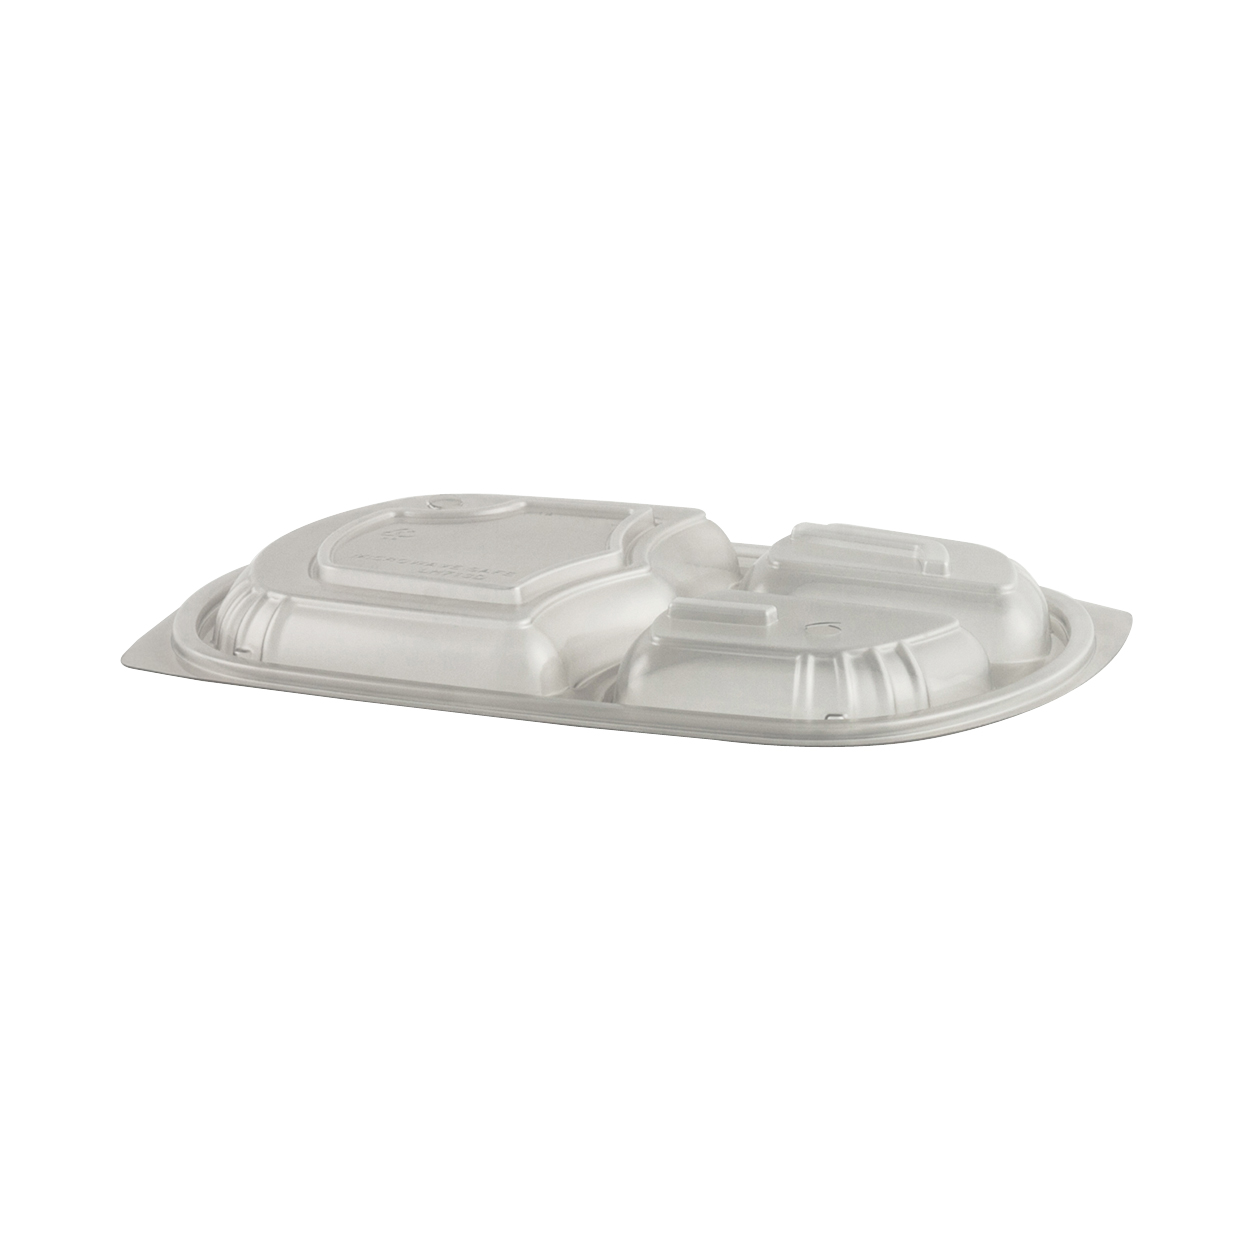 4330713 LH713D Microraves
Clear 3 Comp. Microwavable
Vented Dome Lids (Fits M713)
- 250